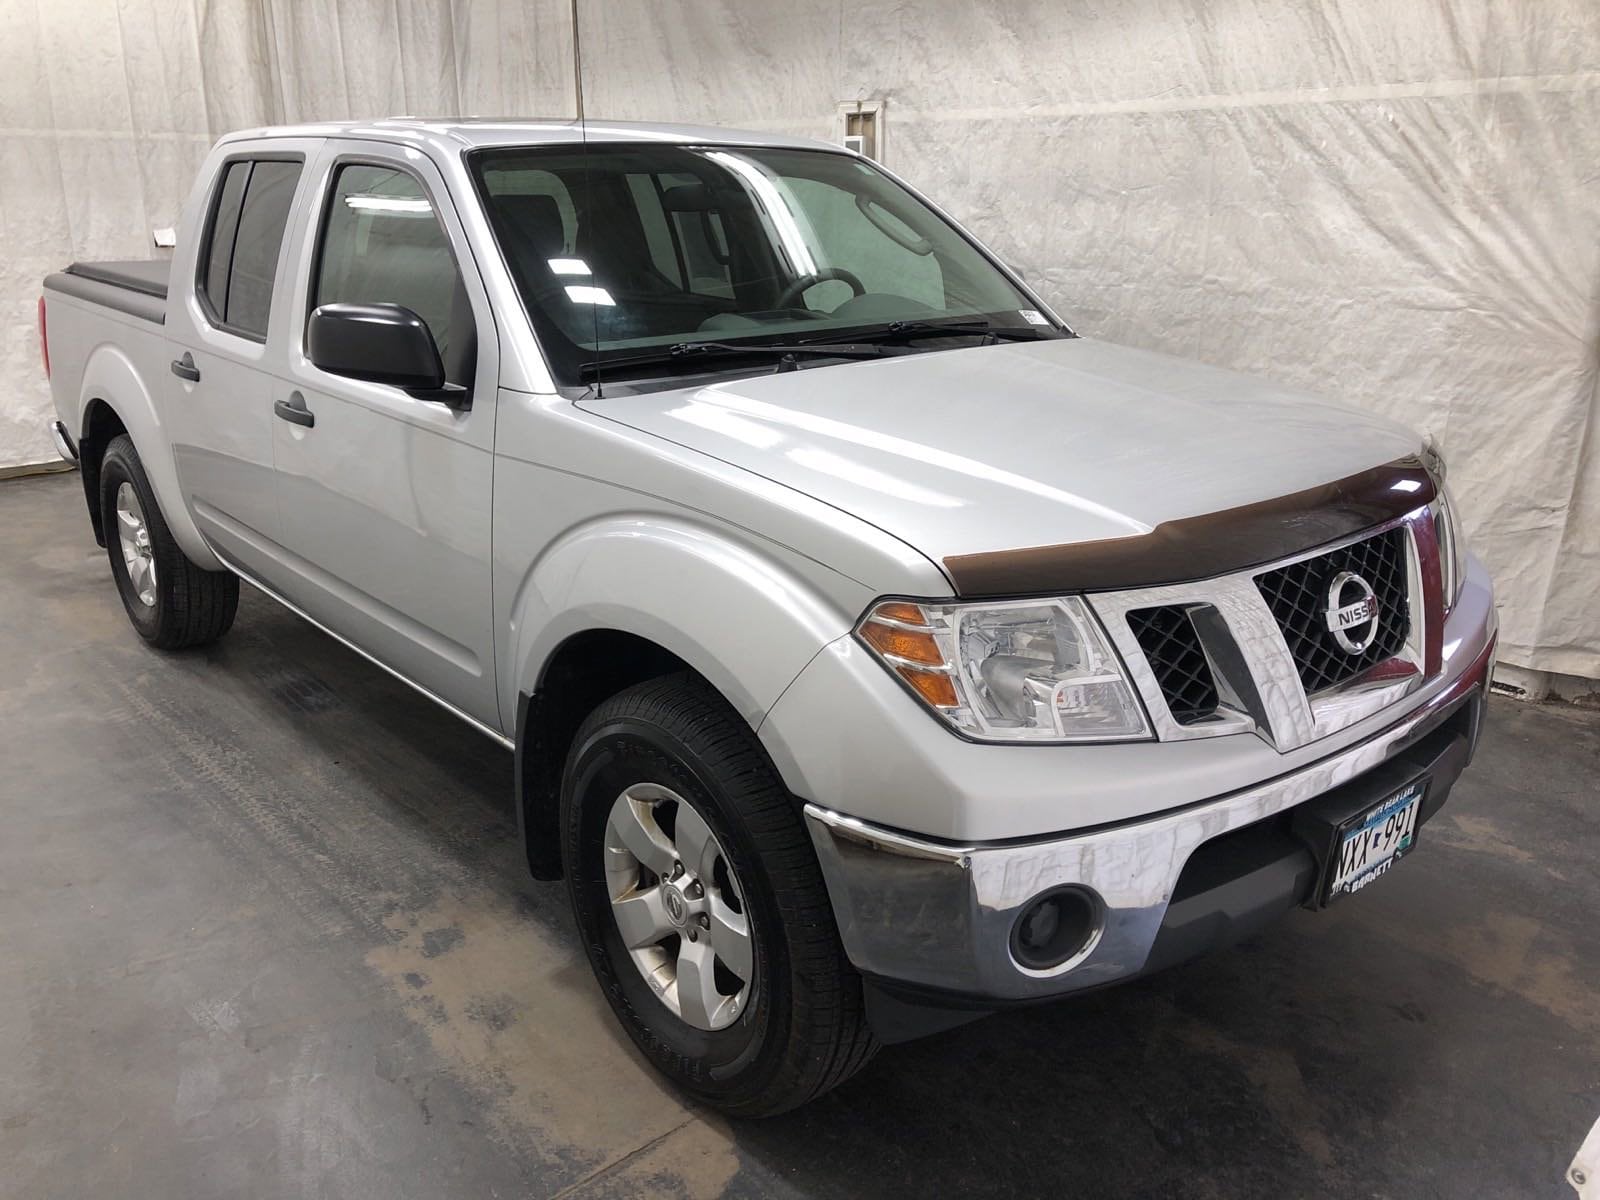 Used 2010 Nissan Frontier SE with VIN 1N6AD0EV3AC419406 for sale in Minneapolis, Minnesota